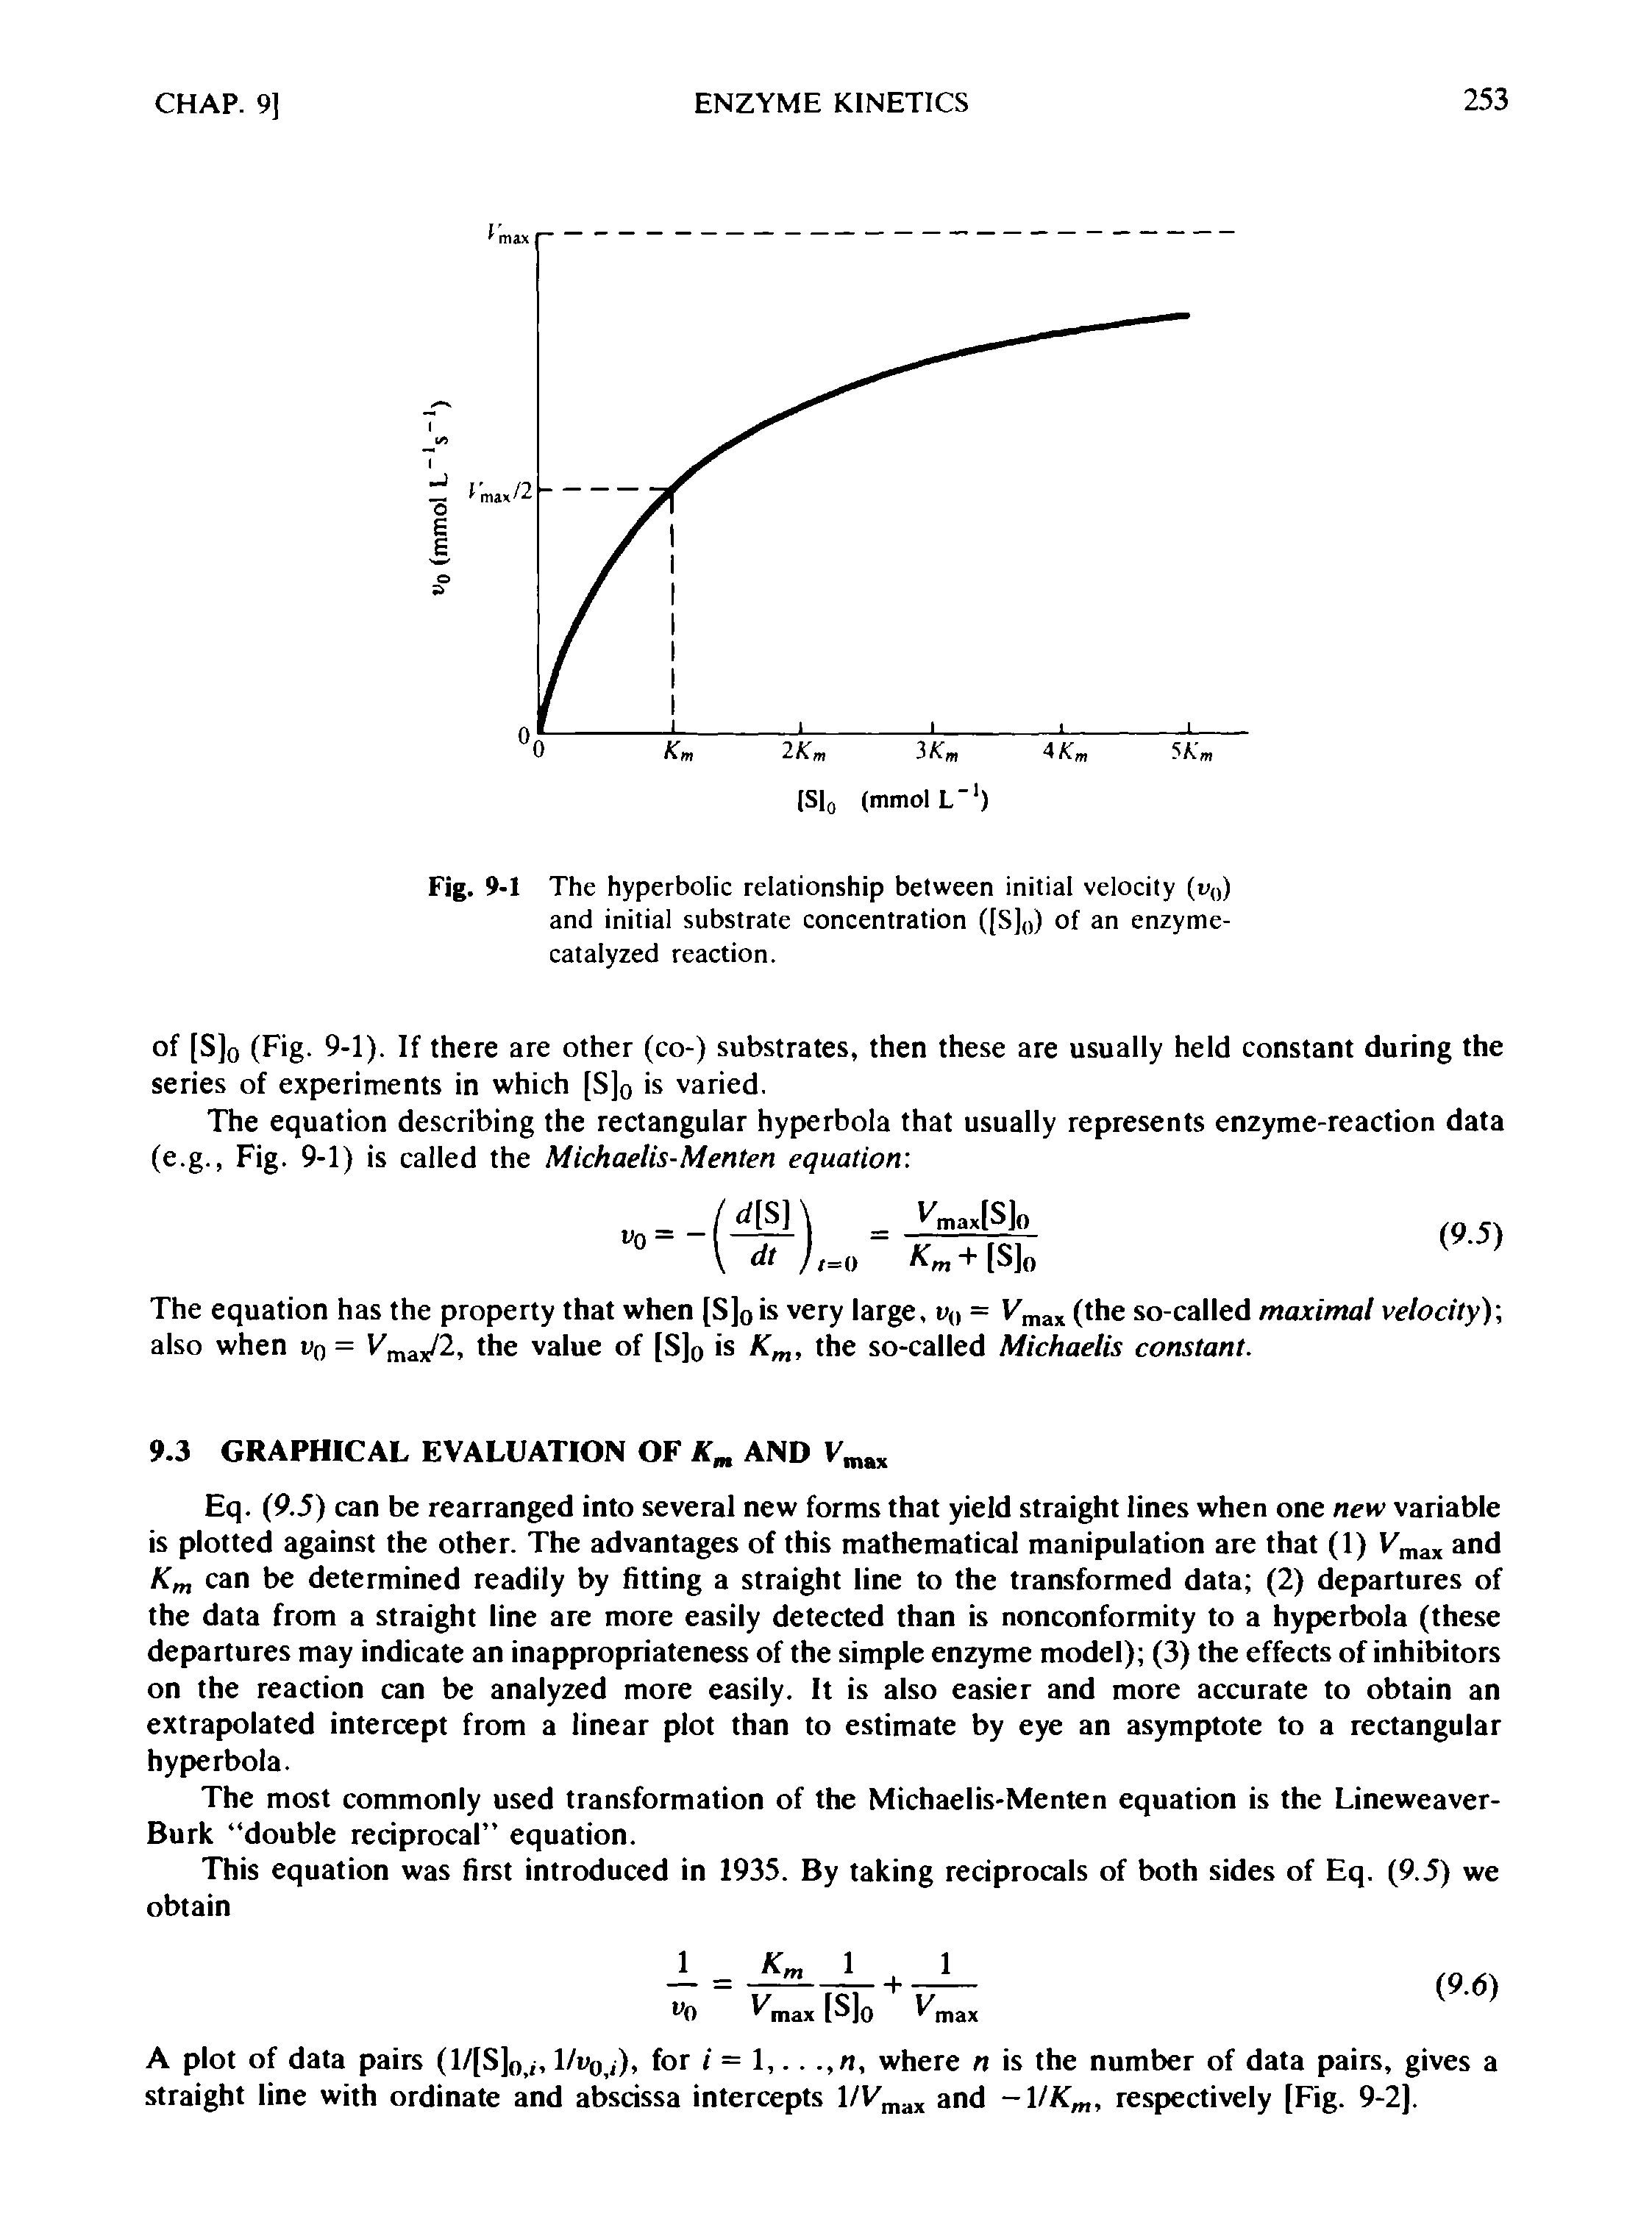 Fig. 9-1 The hyperbolic relationship between initial velocity (u0) and initial substrate concentration ([S]0) of an enzyme-catalyzed reaction.